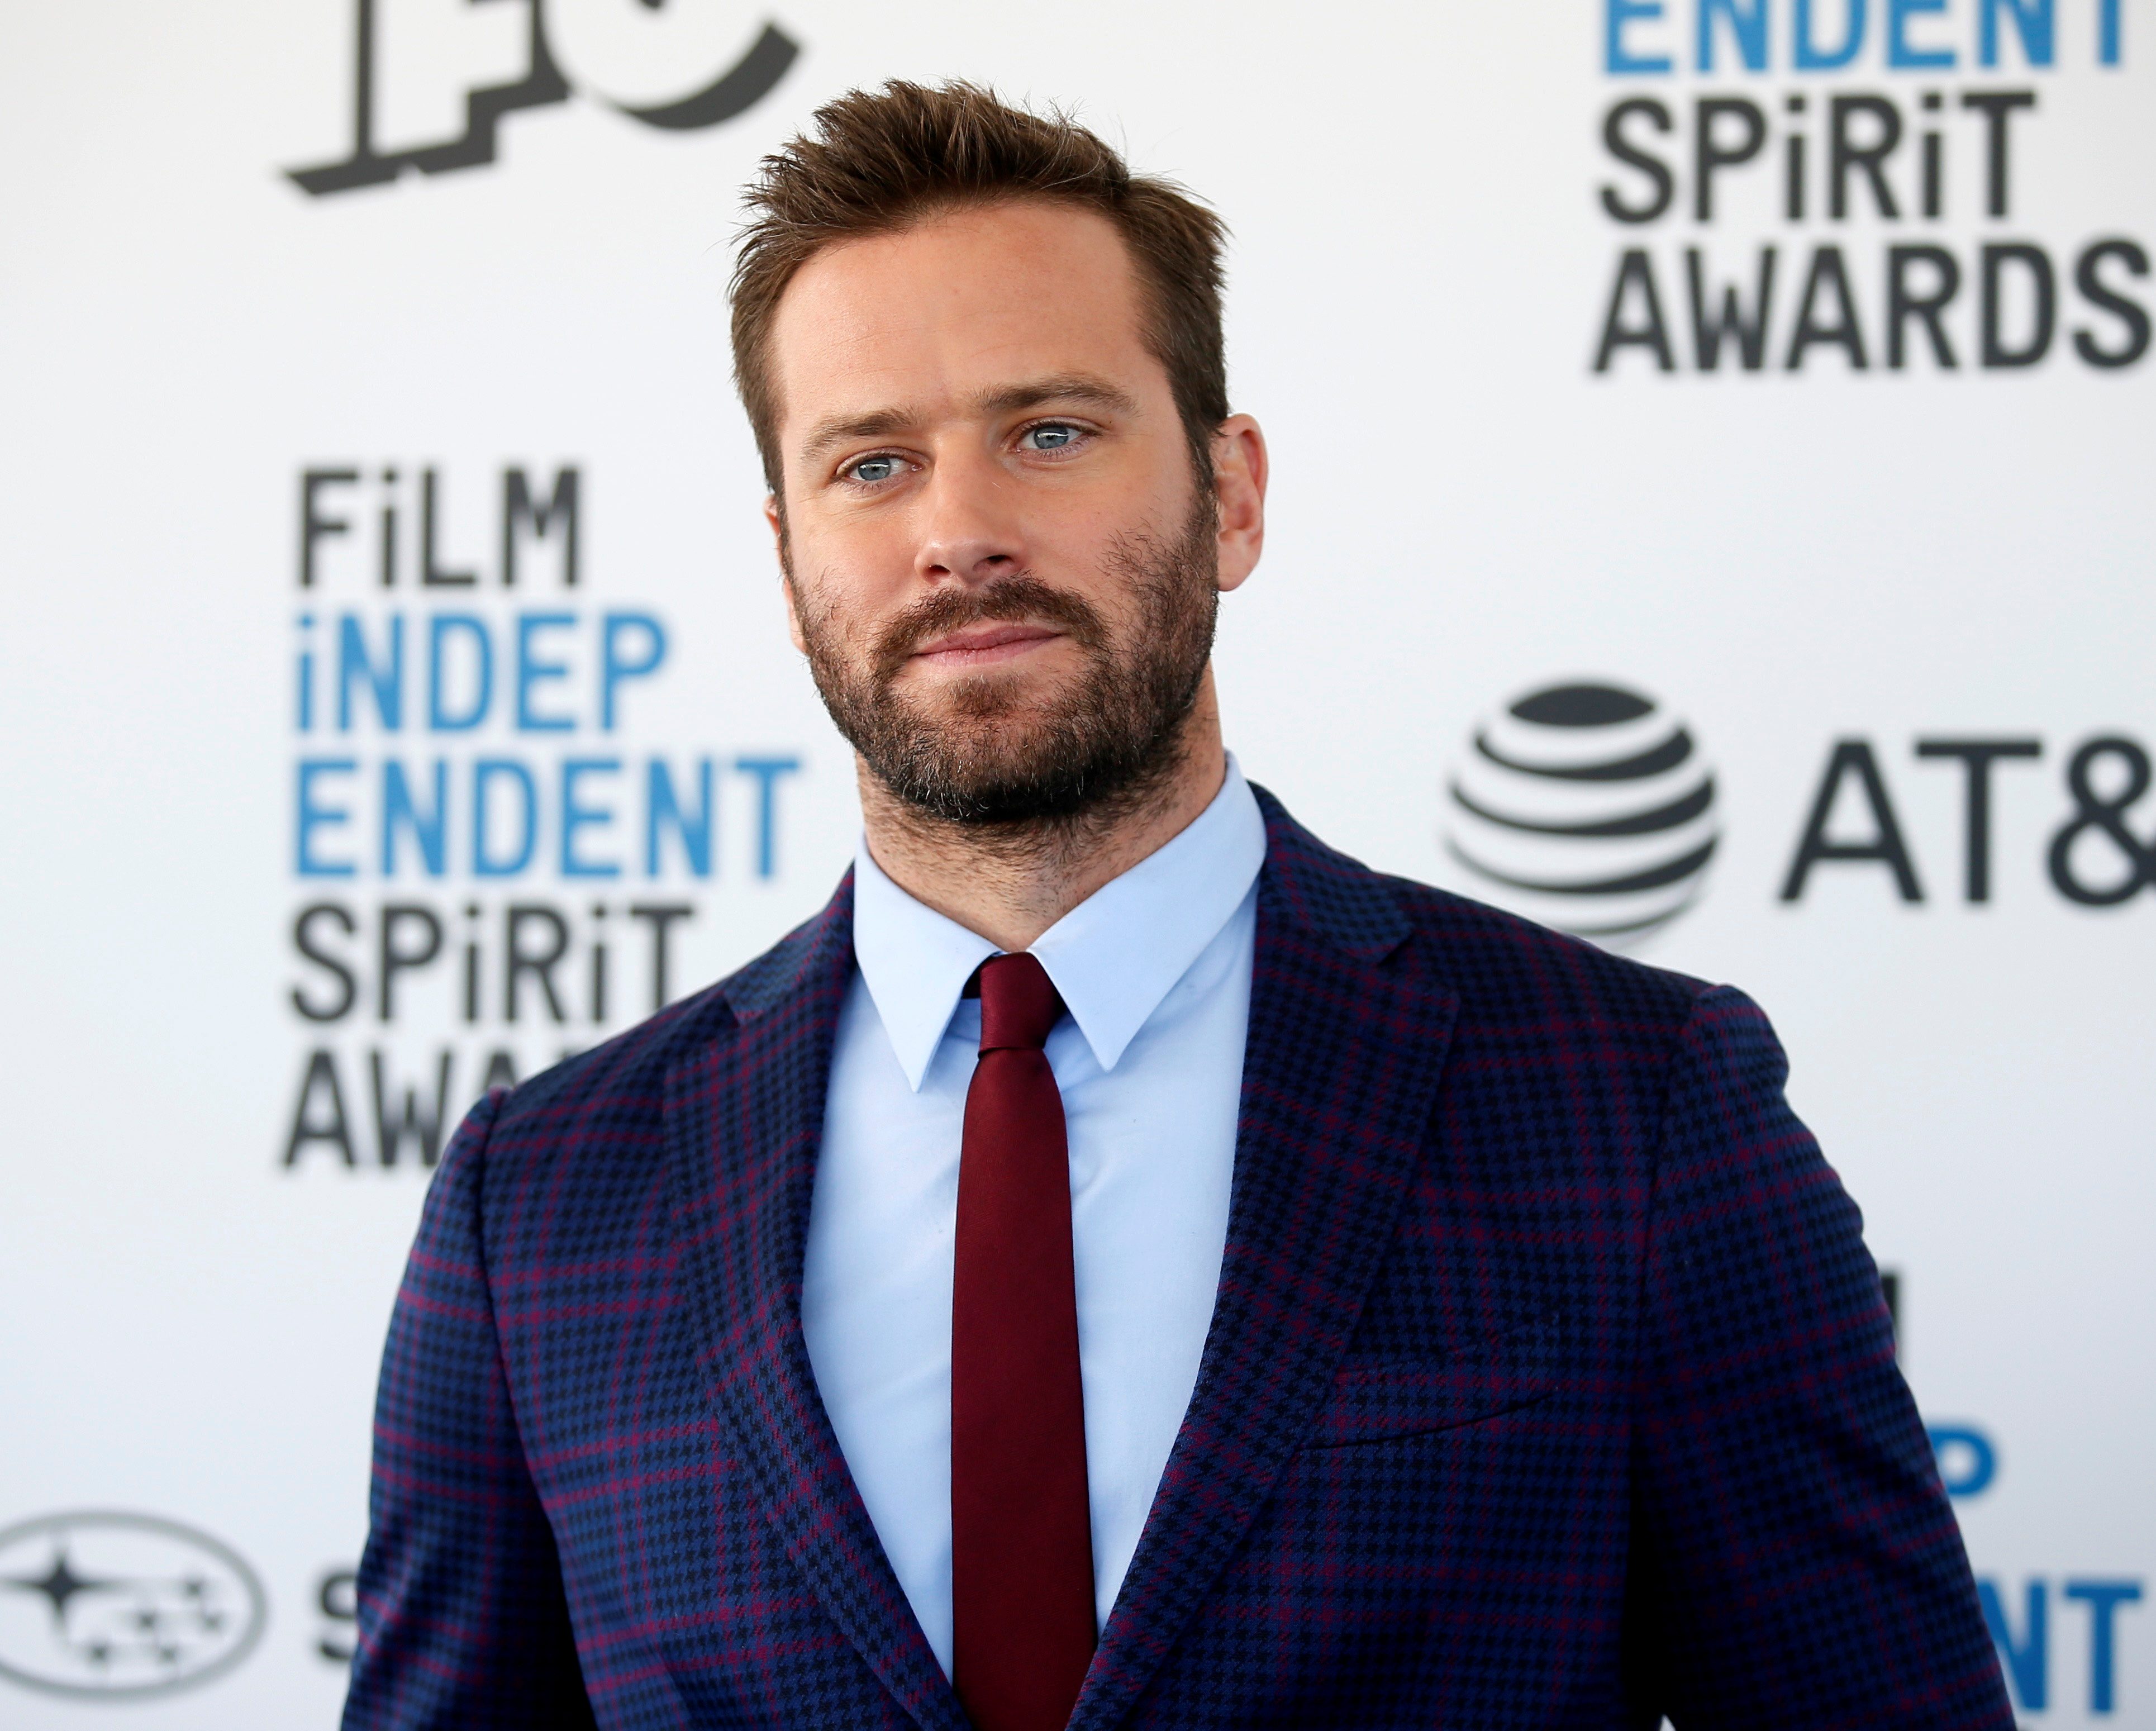 Actor Armie Hammer accused of rape, attorney calls claim ‘outrageous’